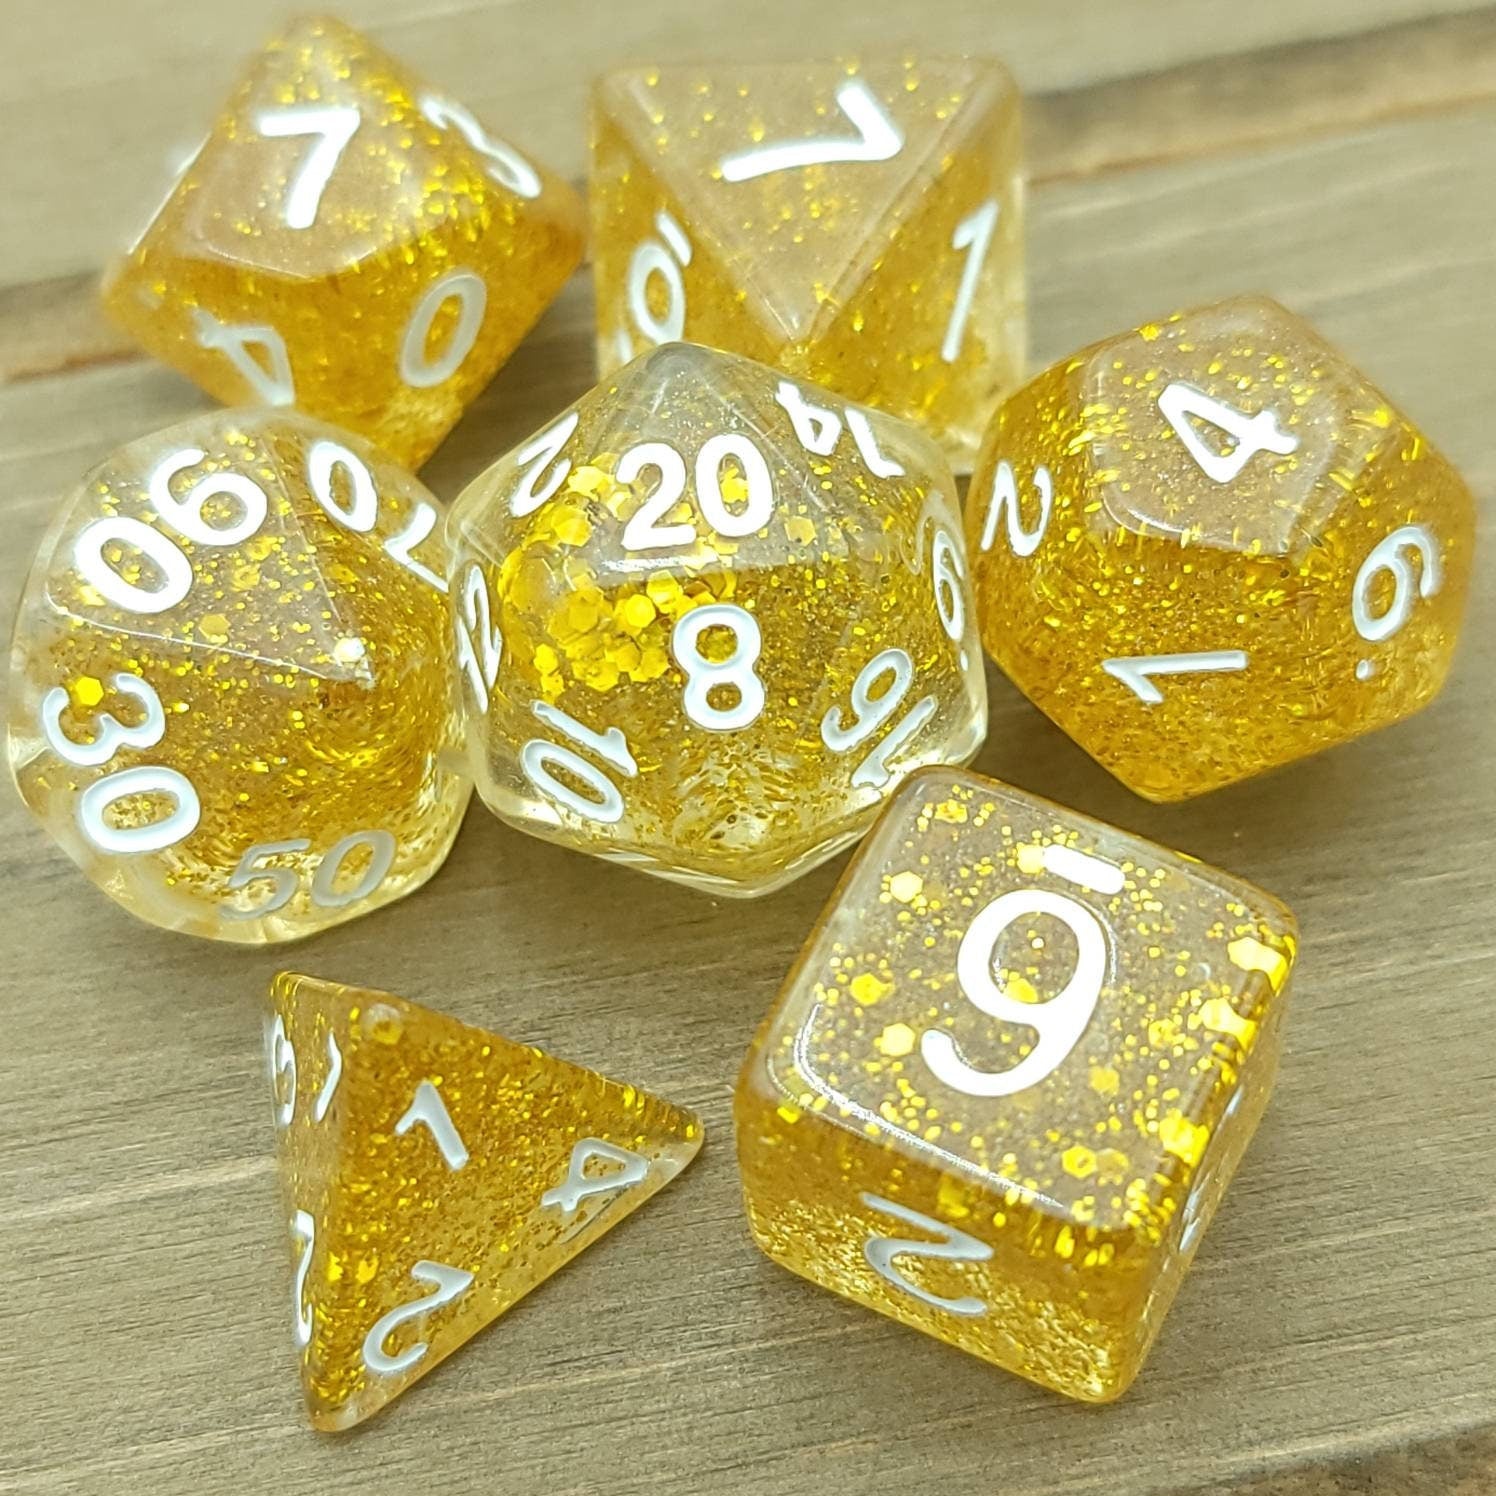 The Treasury | RPG Dice Set| RPG Dice | Polyhedral Dice Set | Dungeons and Dragons | DnD Dice Set | Gaming Dice Set